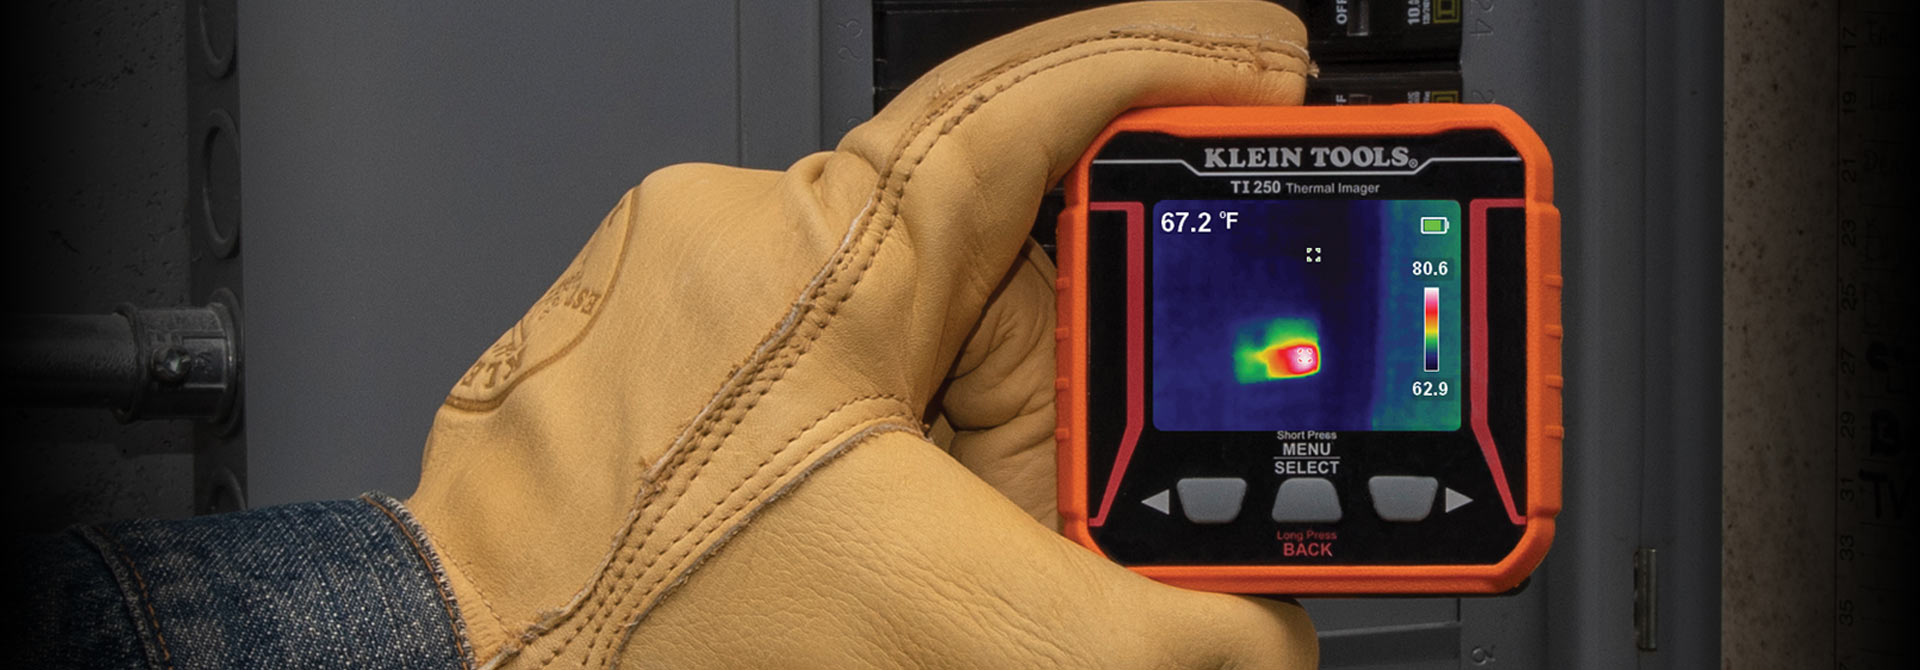 RECHARGEABLE
THERMAL IMAGER